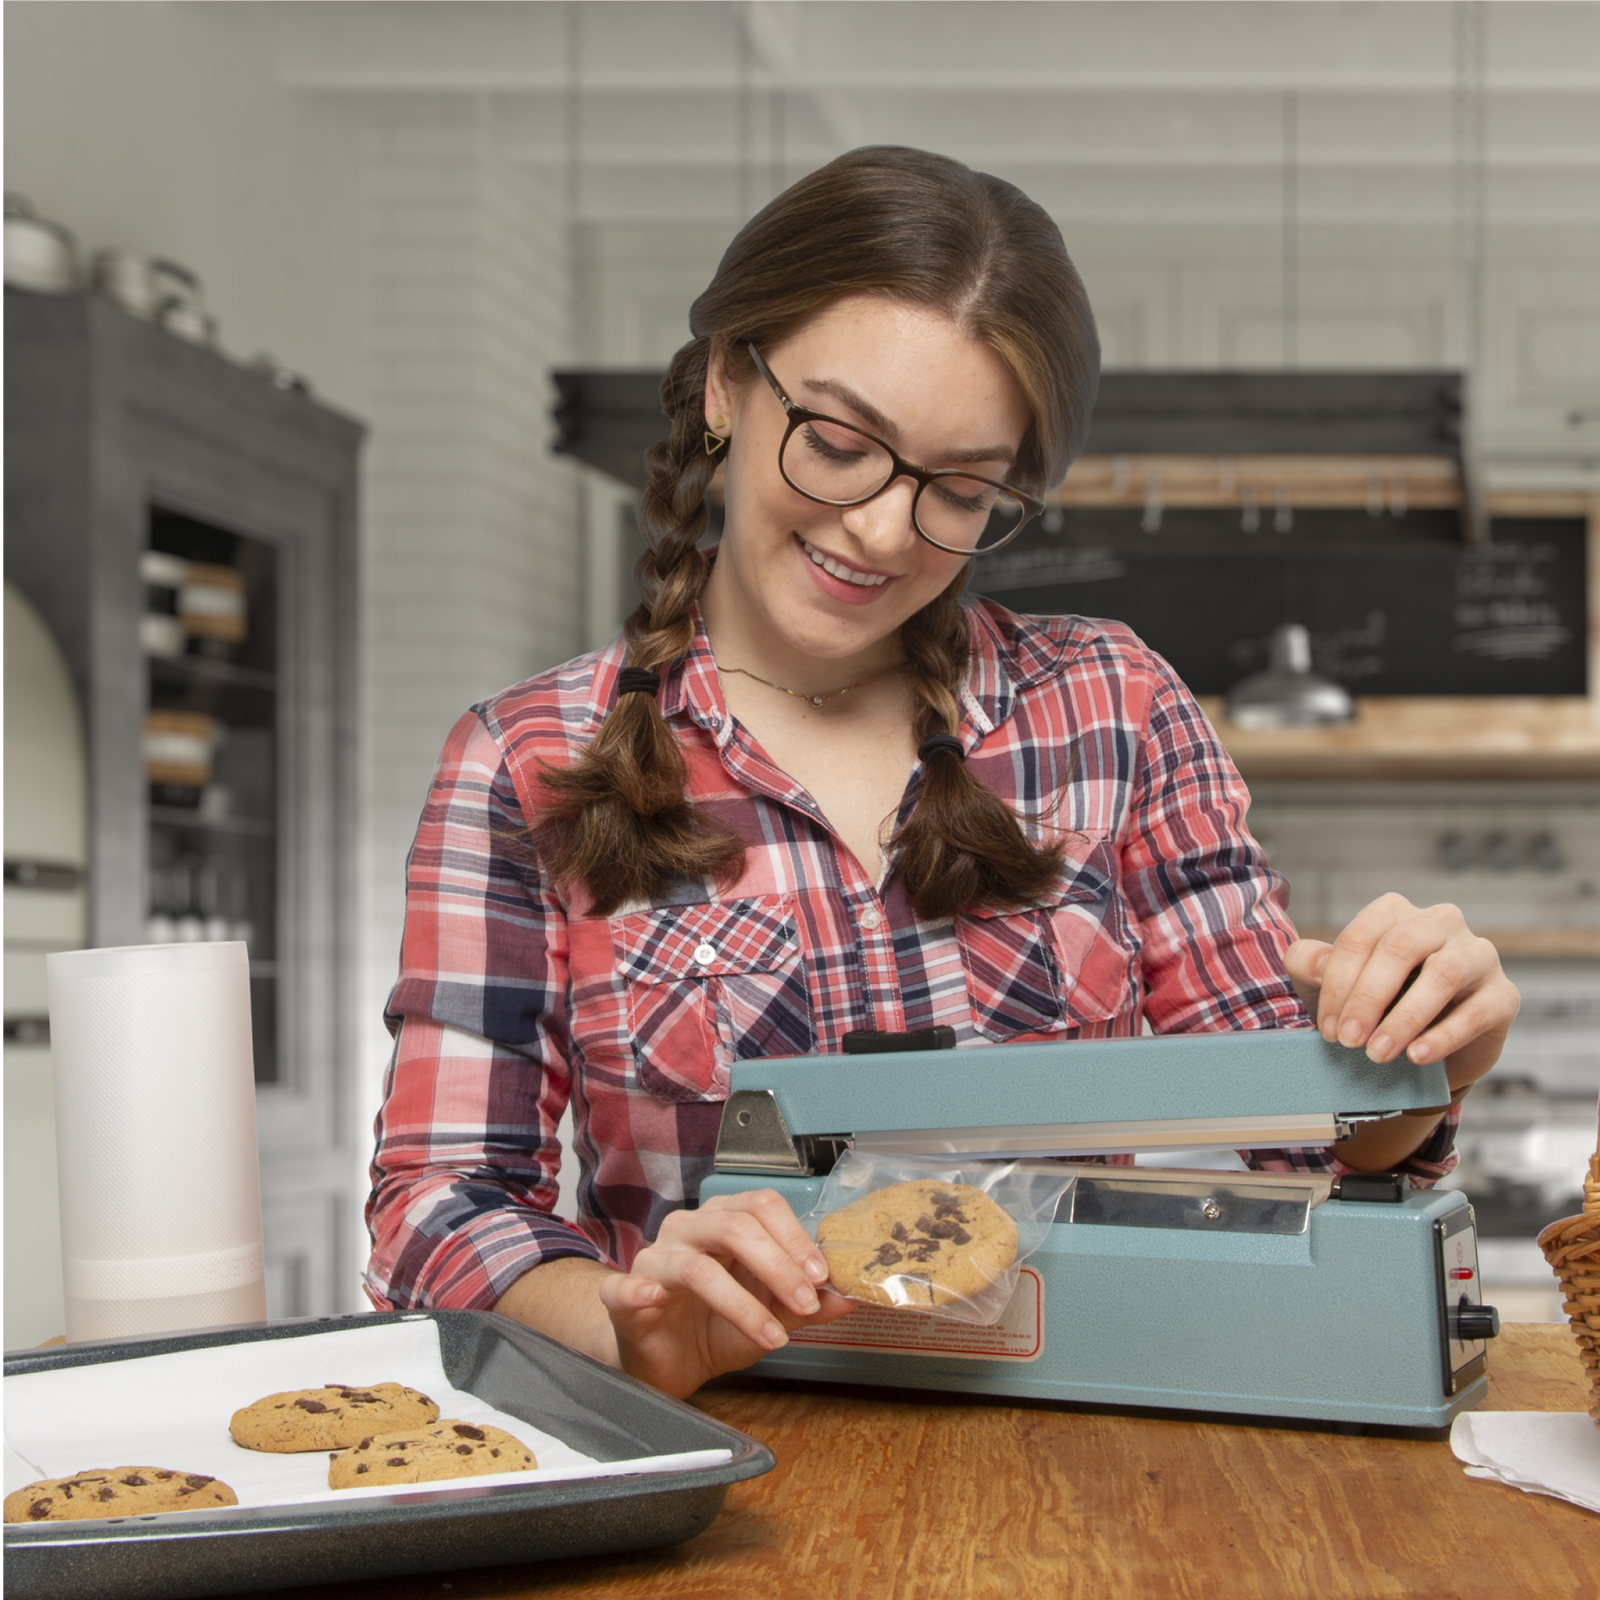 Young teen age girl in a kitchen. She is wearing a pink and blue plaid shirt and is sealing a batch of chocolate chip cookies in individual sealable plastic bags using the 8 inch manual impulse sealer